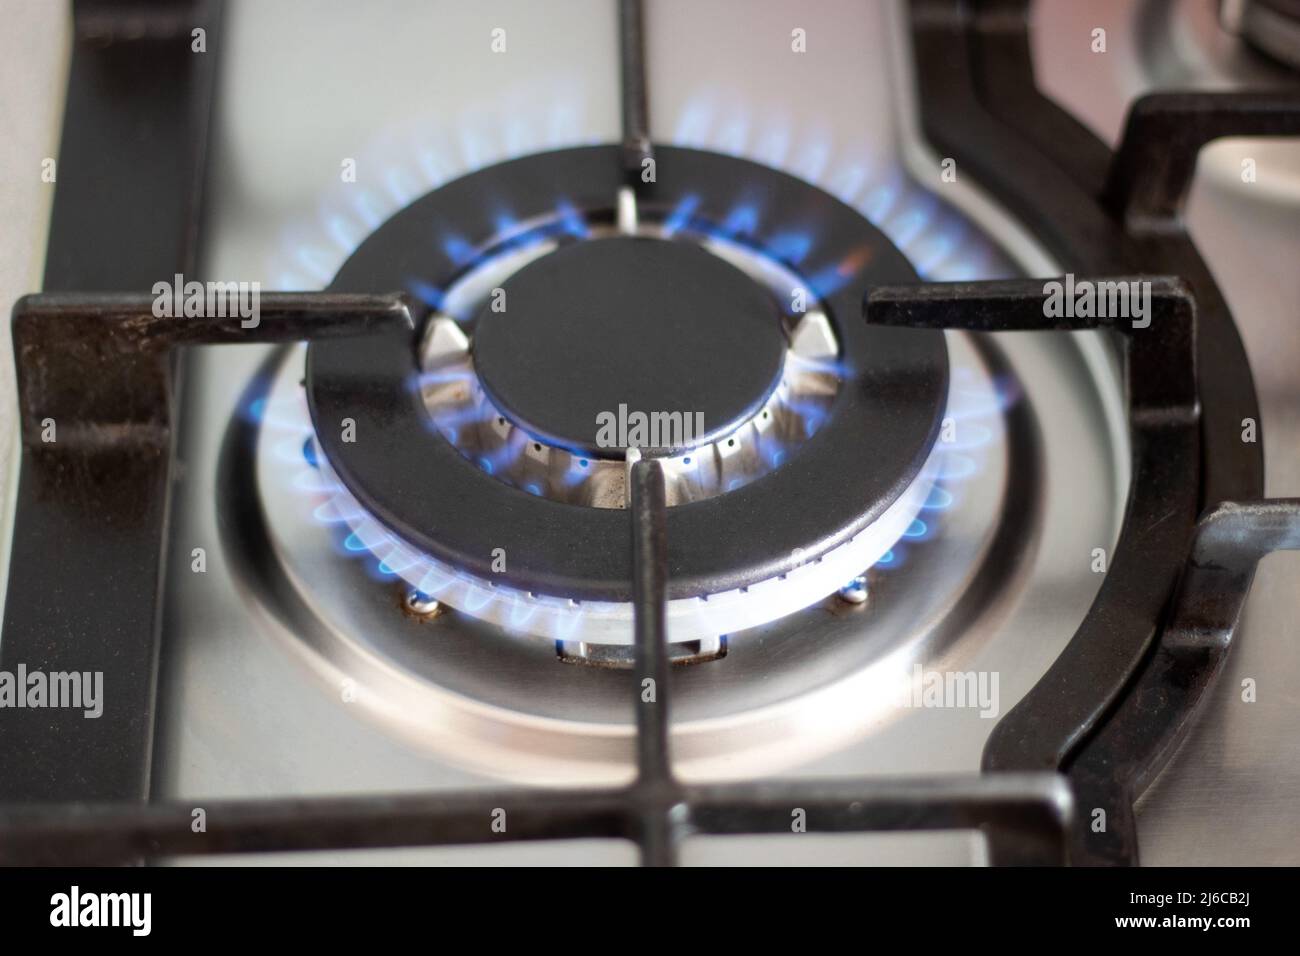 A close-up view of the kitchen gas stove Stock Photo